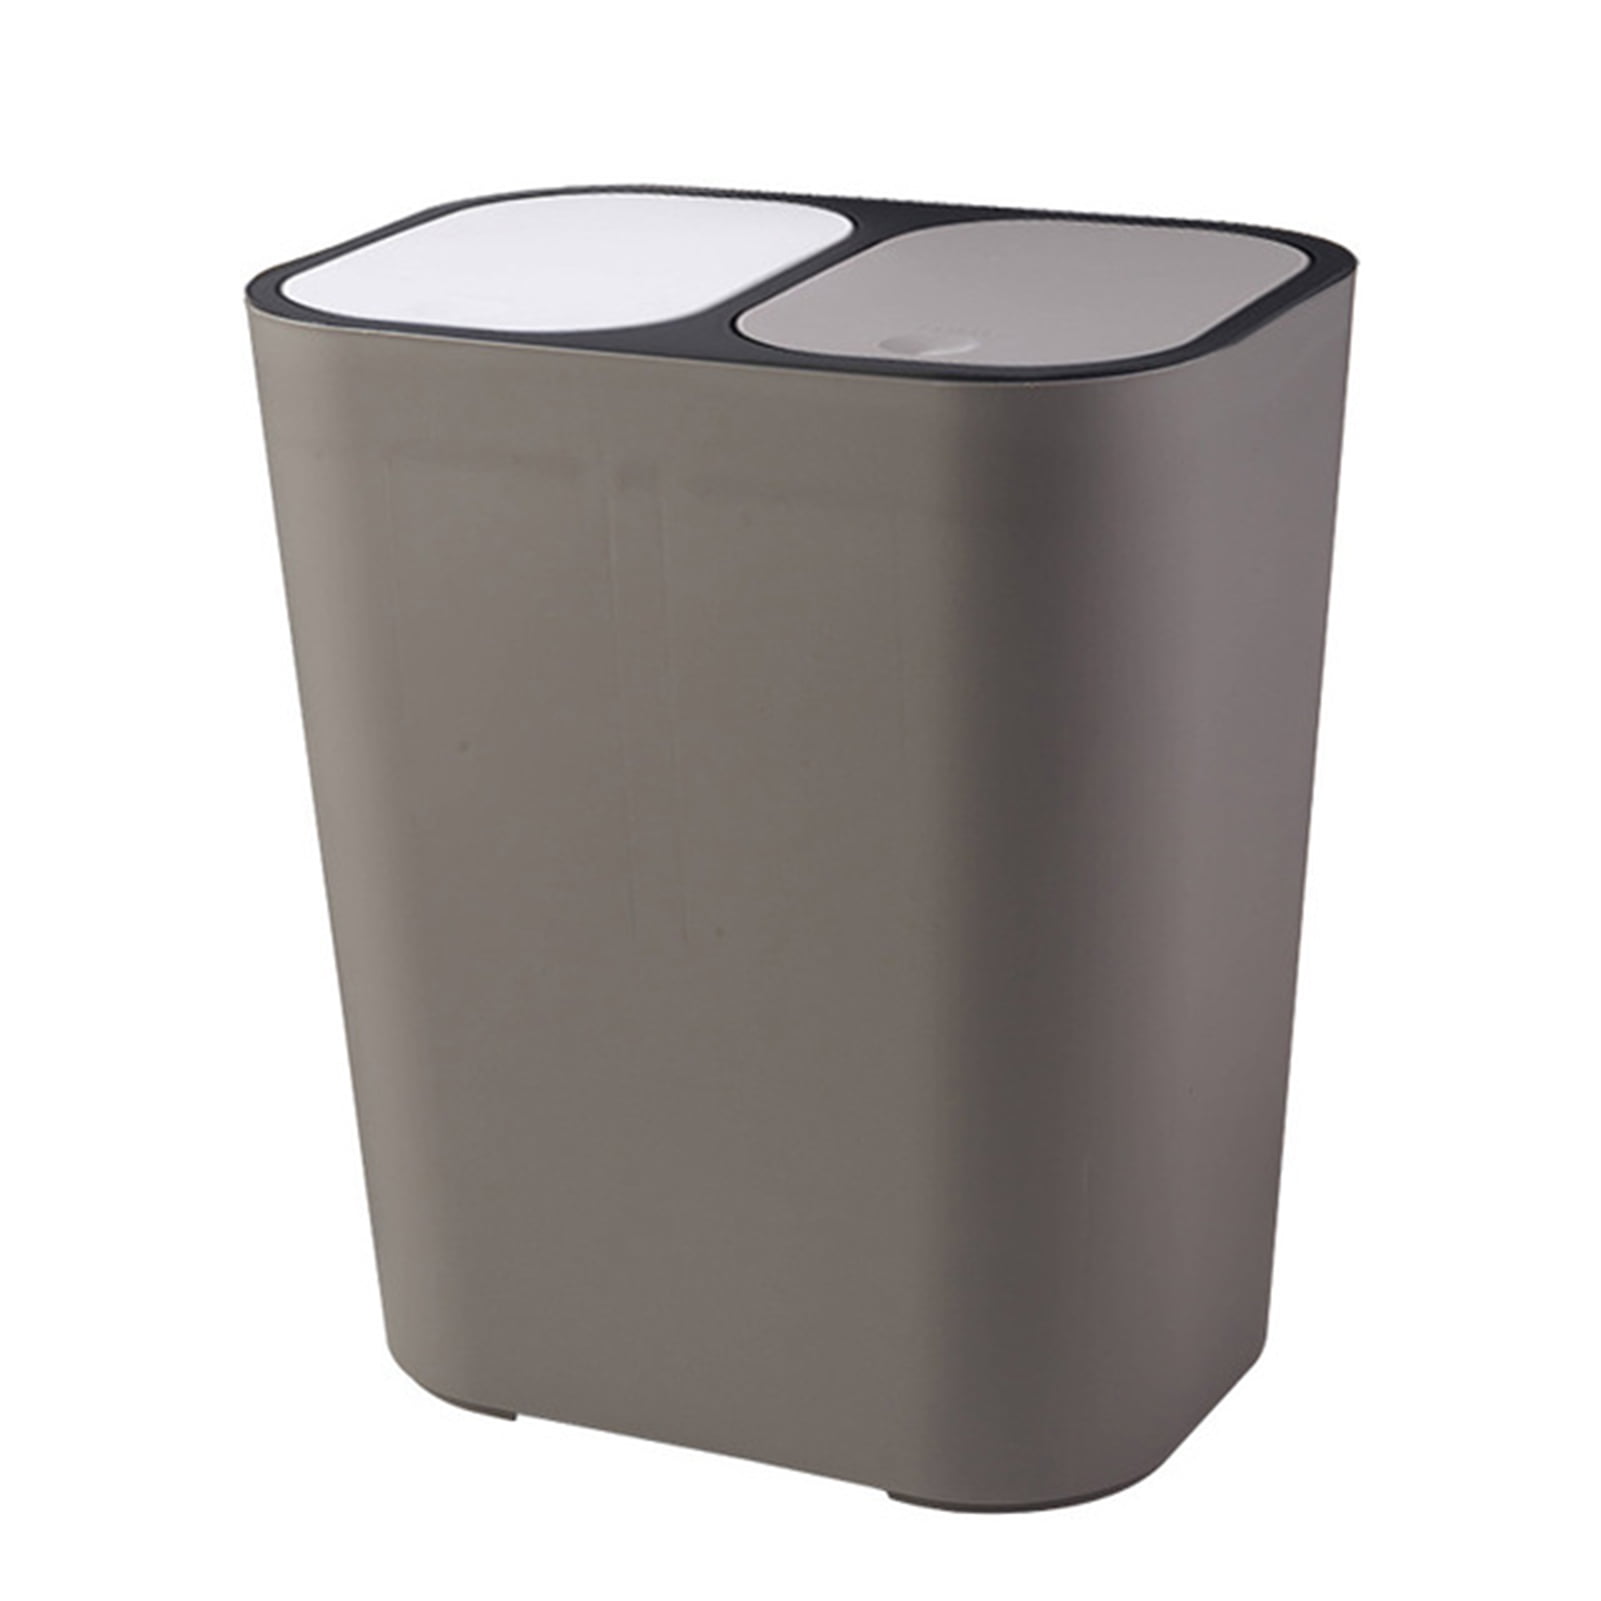 Taloit Double Recycling Waste Bin,Double Compartment Bin for Waste Separation Rectangle Plastic Push-Button Dual Compartment Trash Can 12liter